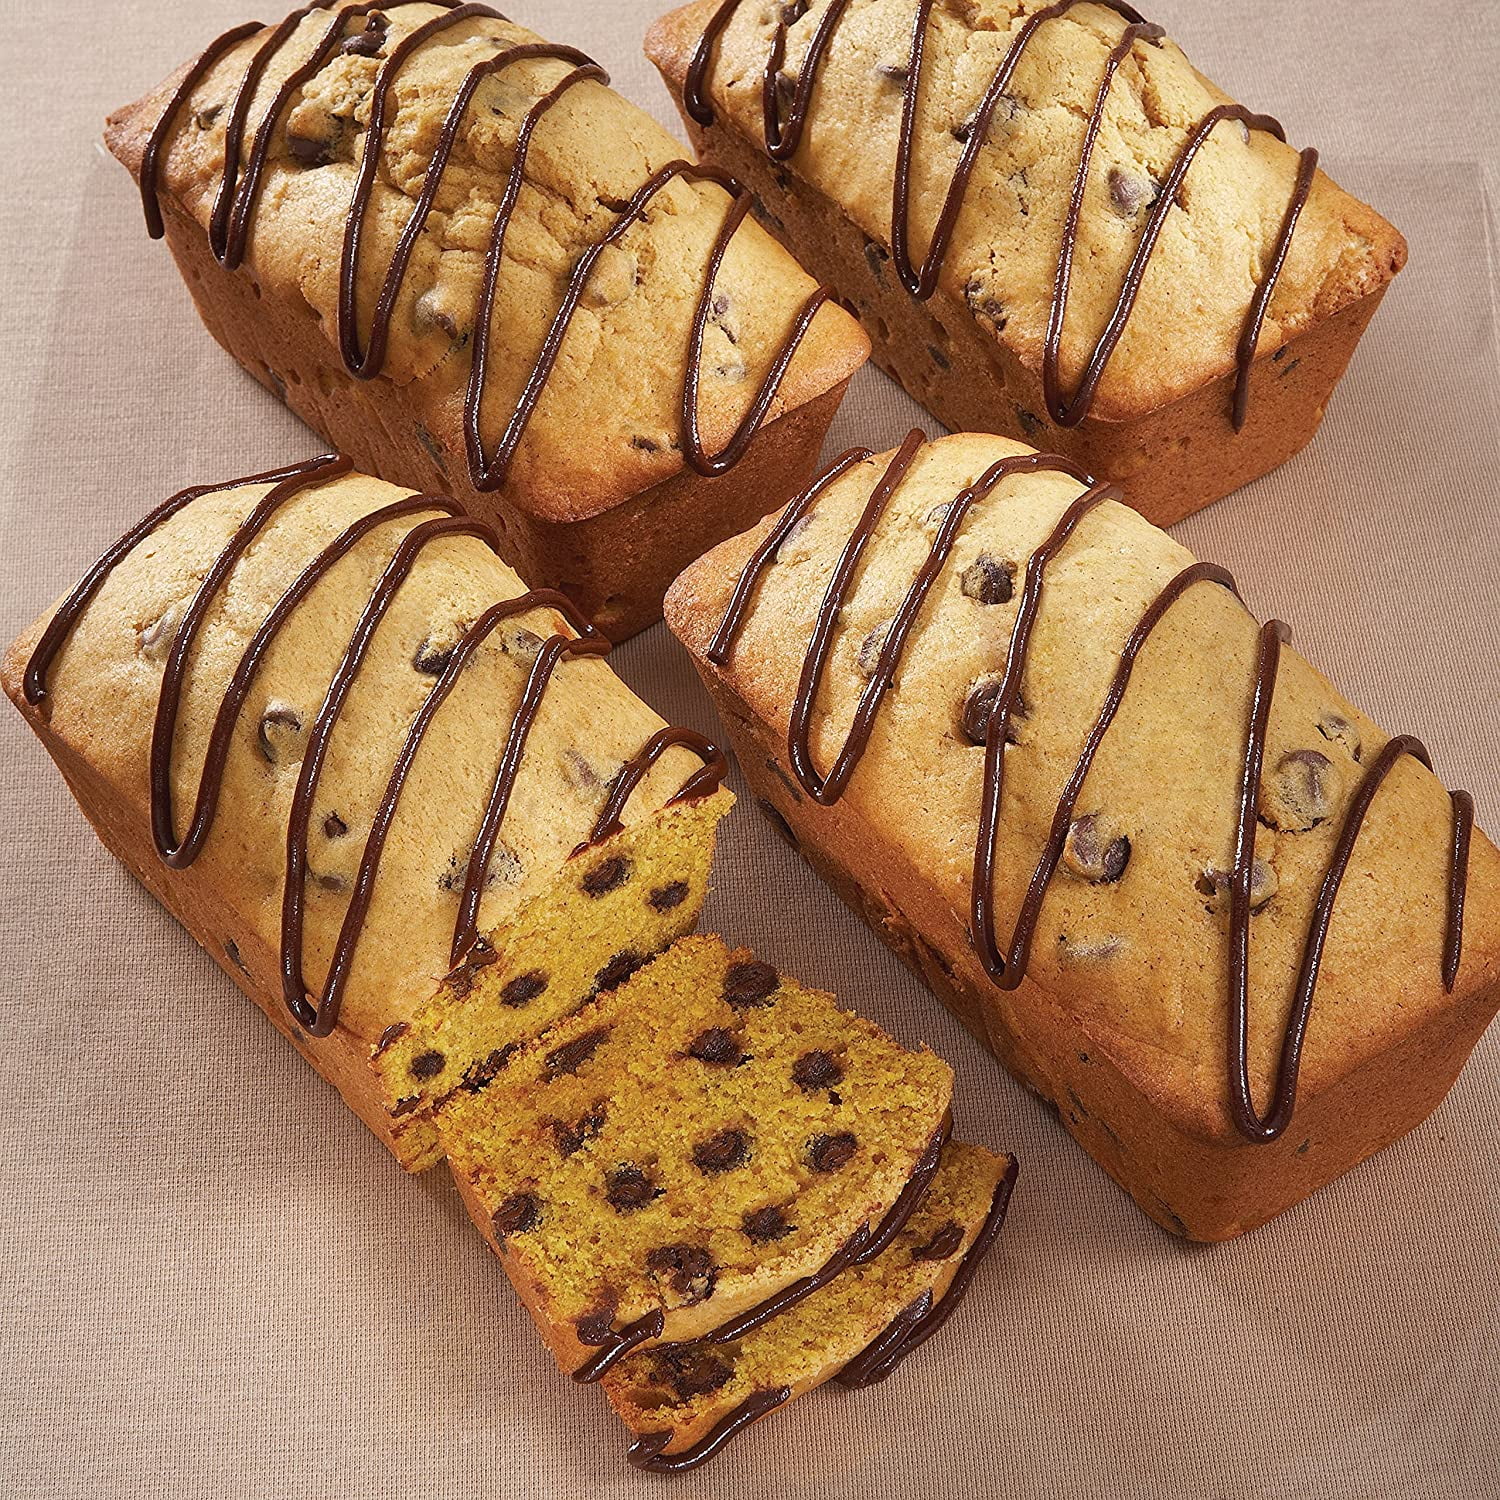 USA Pan Mini Bread Loaf Pan (Set of 4)  Bread baker, Chocolate chip bread  recipe, Ceramic dishes